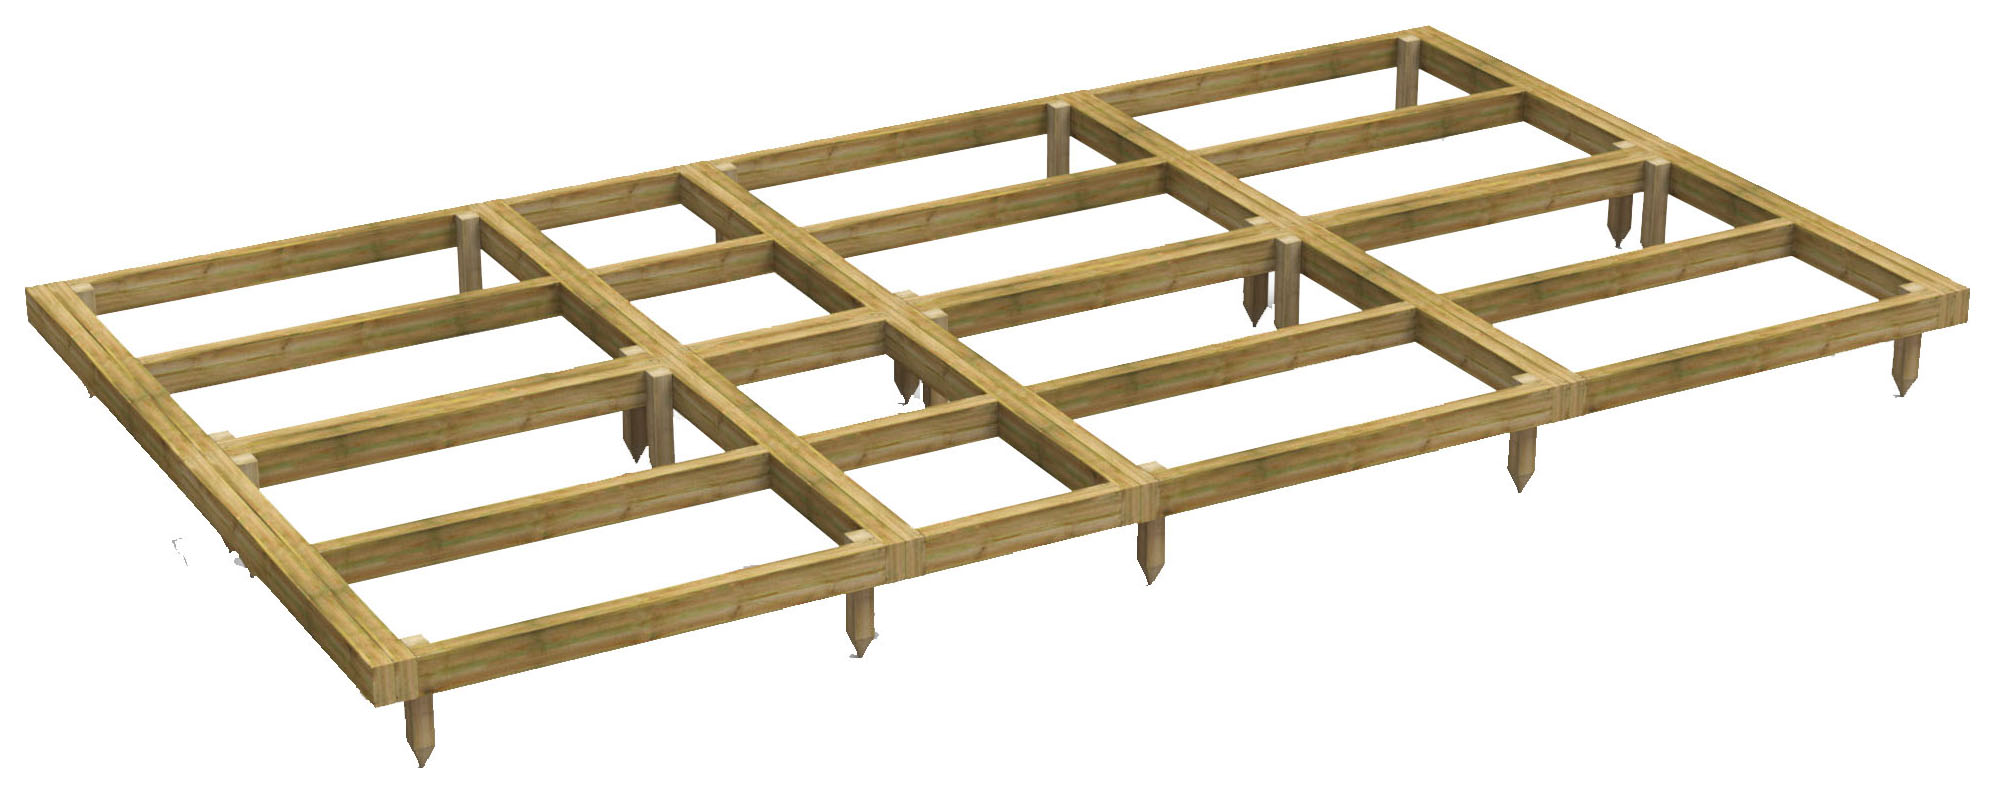 Image of Power Sheds 14 x 8ft Pressure Treated Garden Building Base Kit